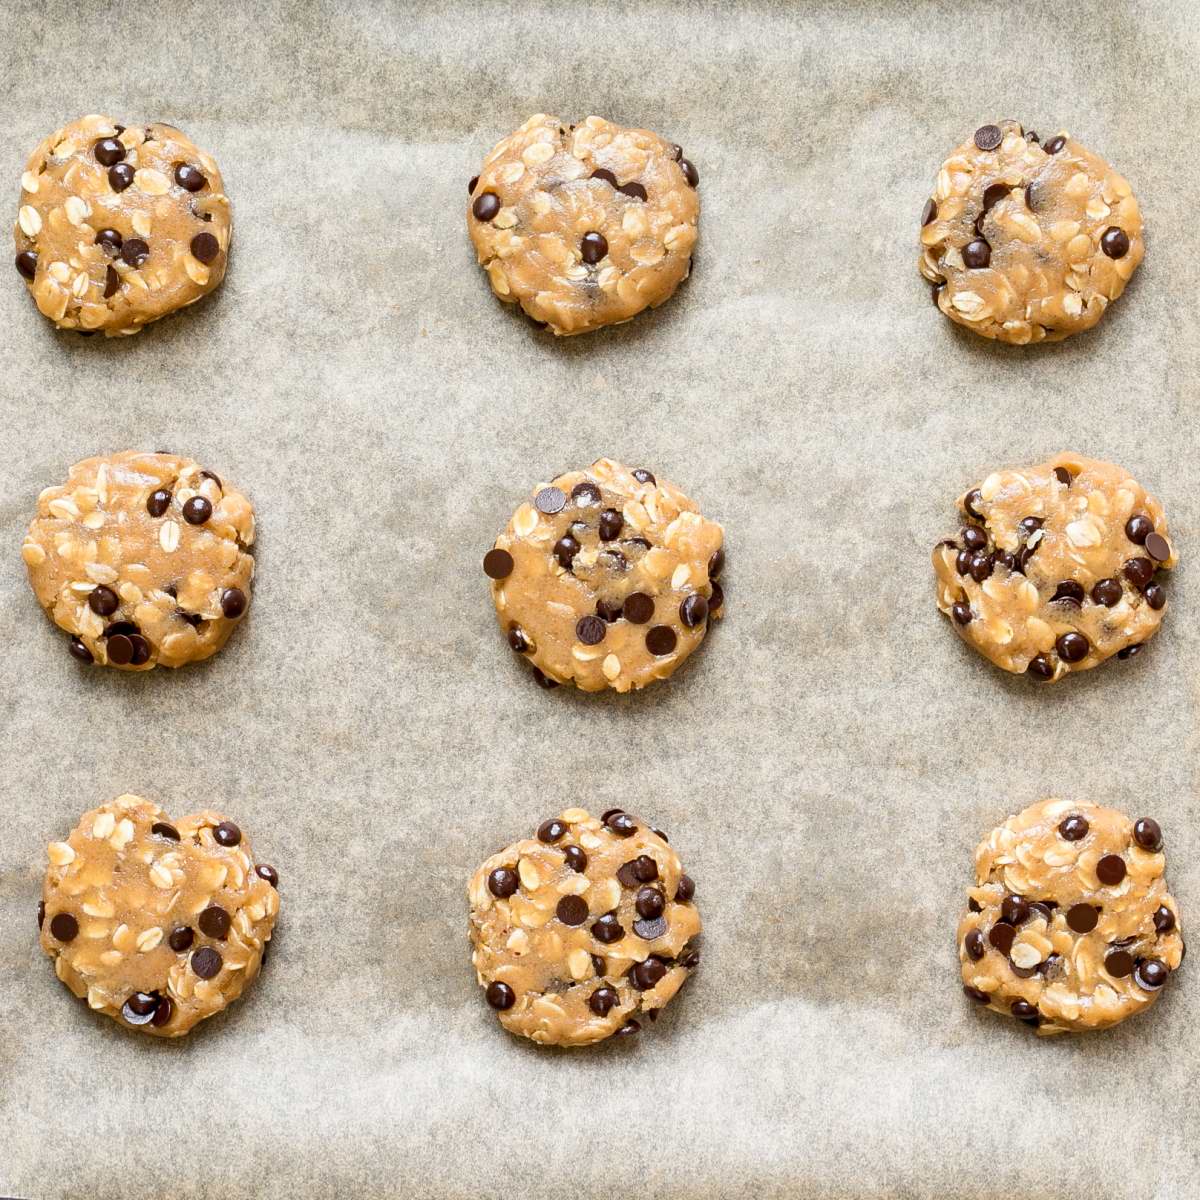 Unbaked round cookie batters with oats and chocolate chips on parchment paper neatly placed away from each other.